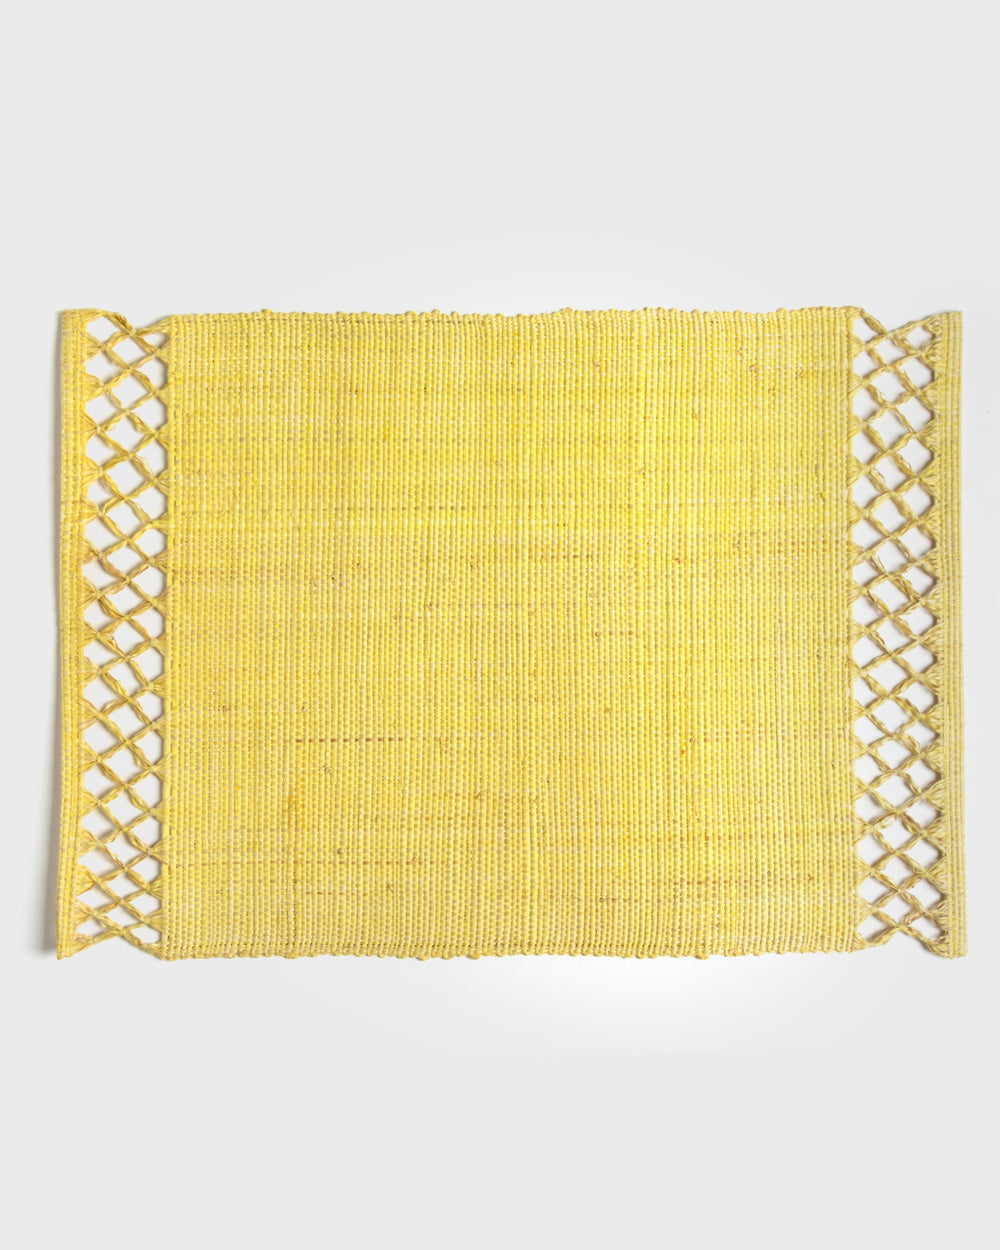 Tania Bulhoes Placemat Buzios Light Yellow